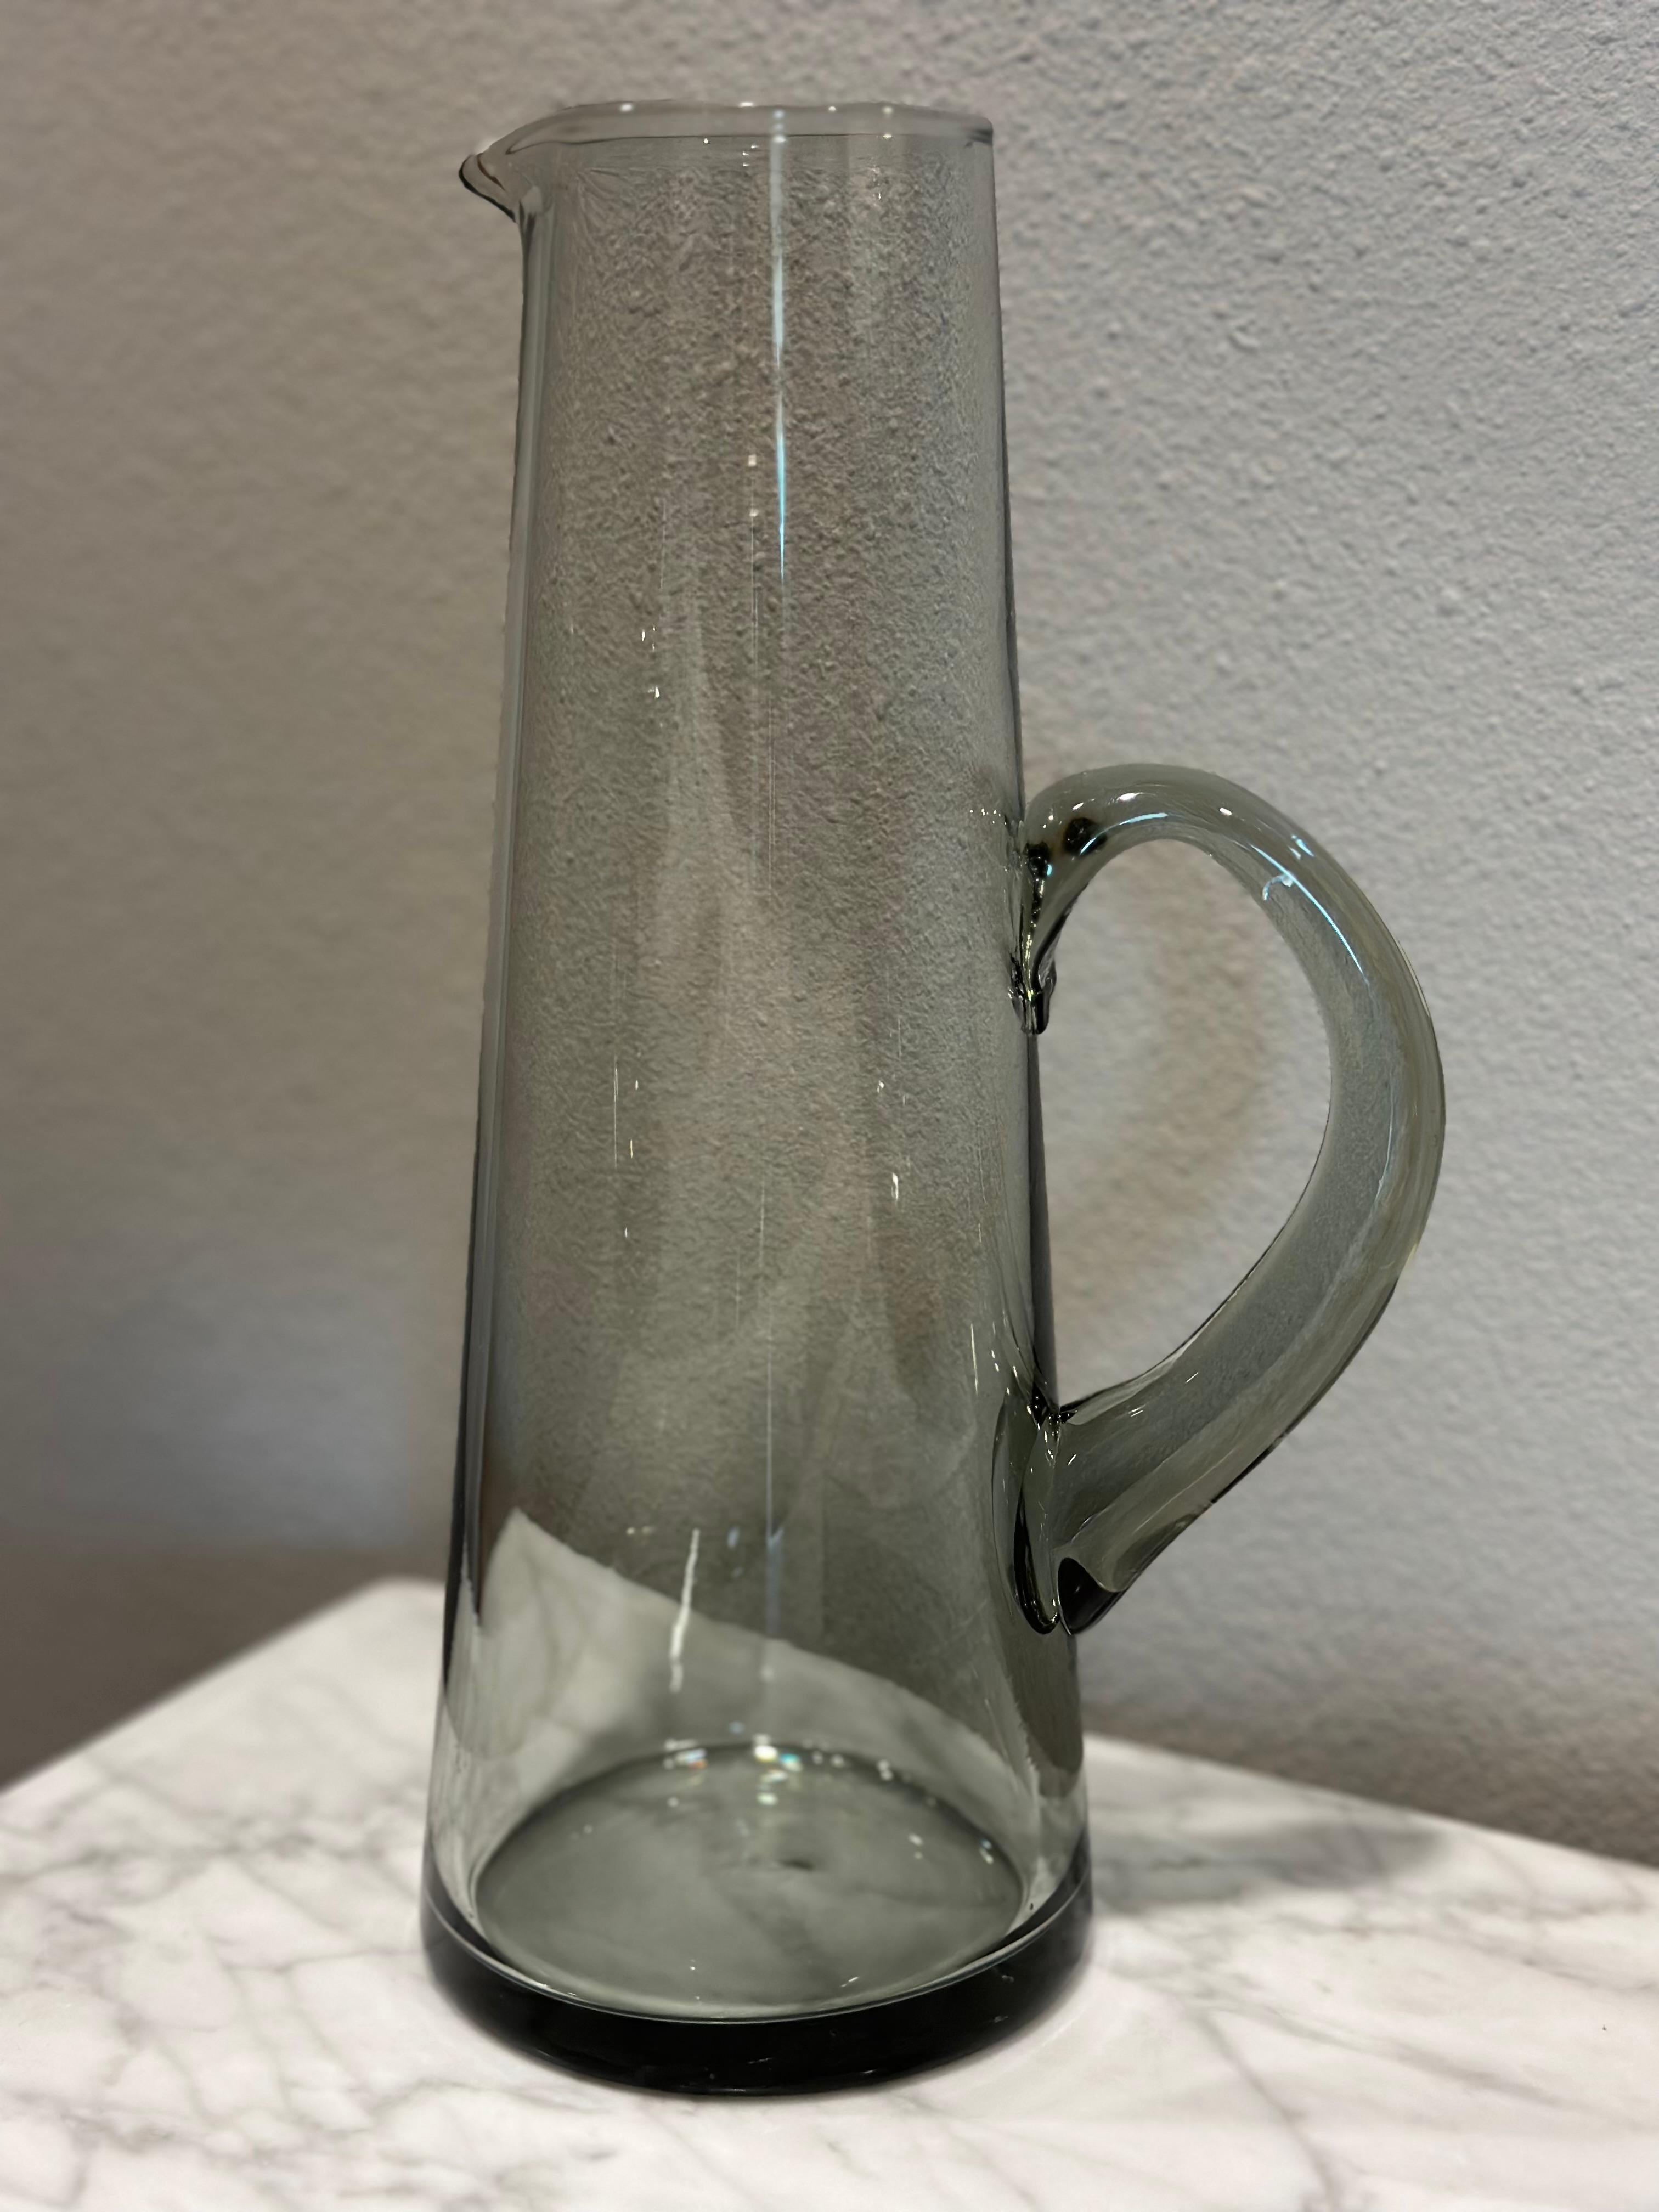 This late 20th century glass pitcher is an exemplary example of modern art. Handcrafted with intricate care out of smoke-hued glass, it is in pristine condition with no chips or any other kind of damages.